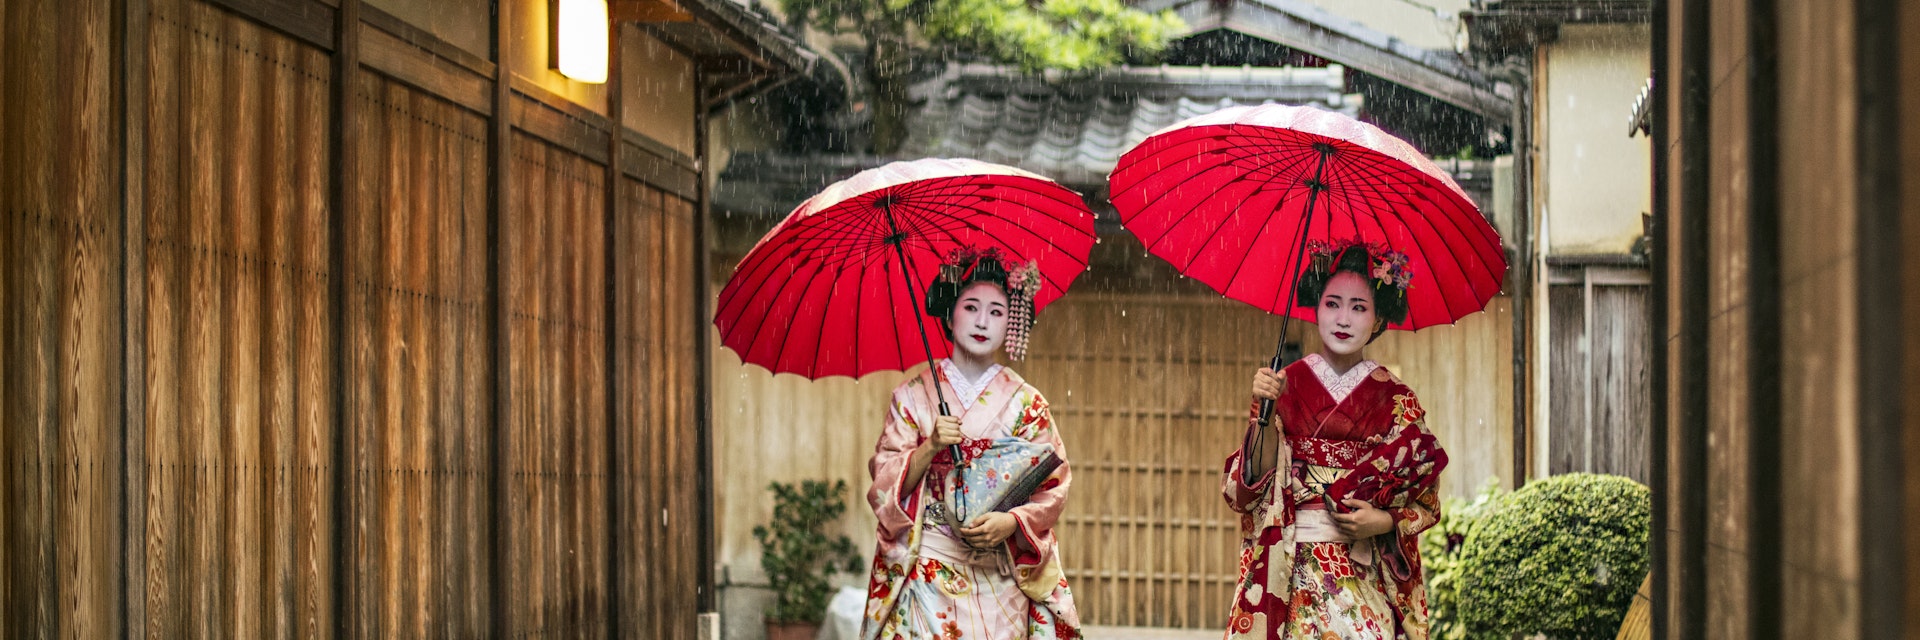 Full length of young maikos holding red umbrellas during rainy season. Beautiful geisha girls wearing traditional dress called kimono. They are walking on wet street.
641625768